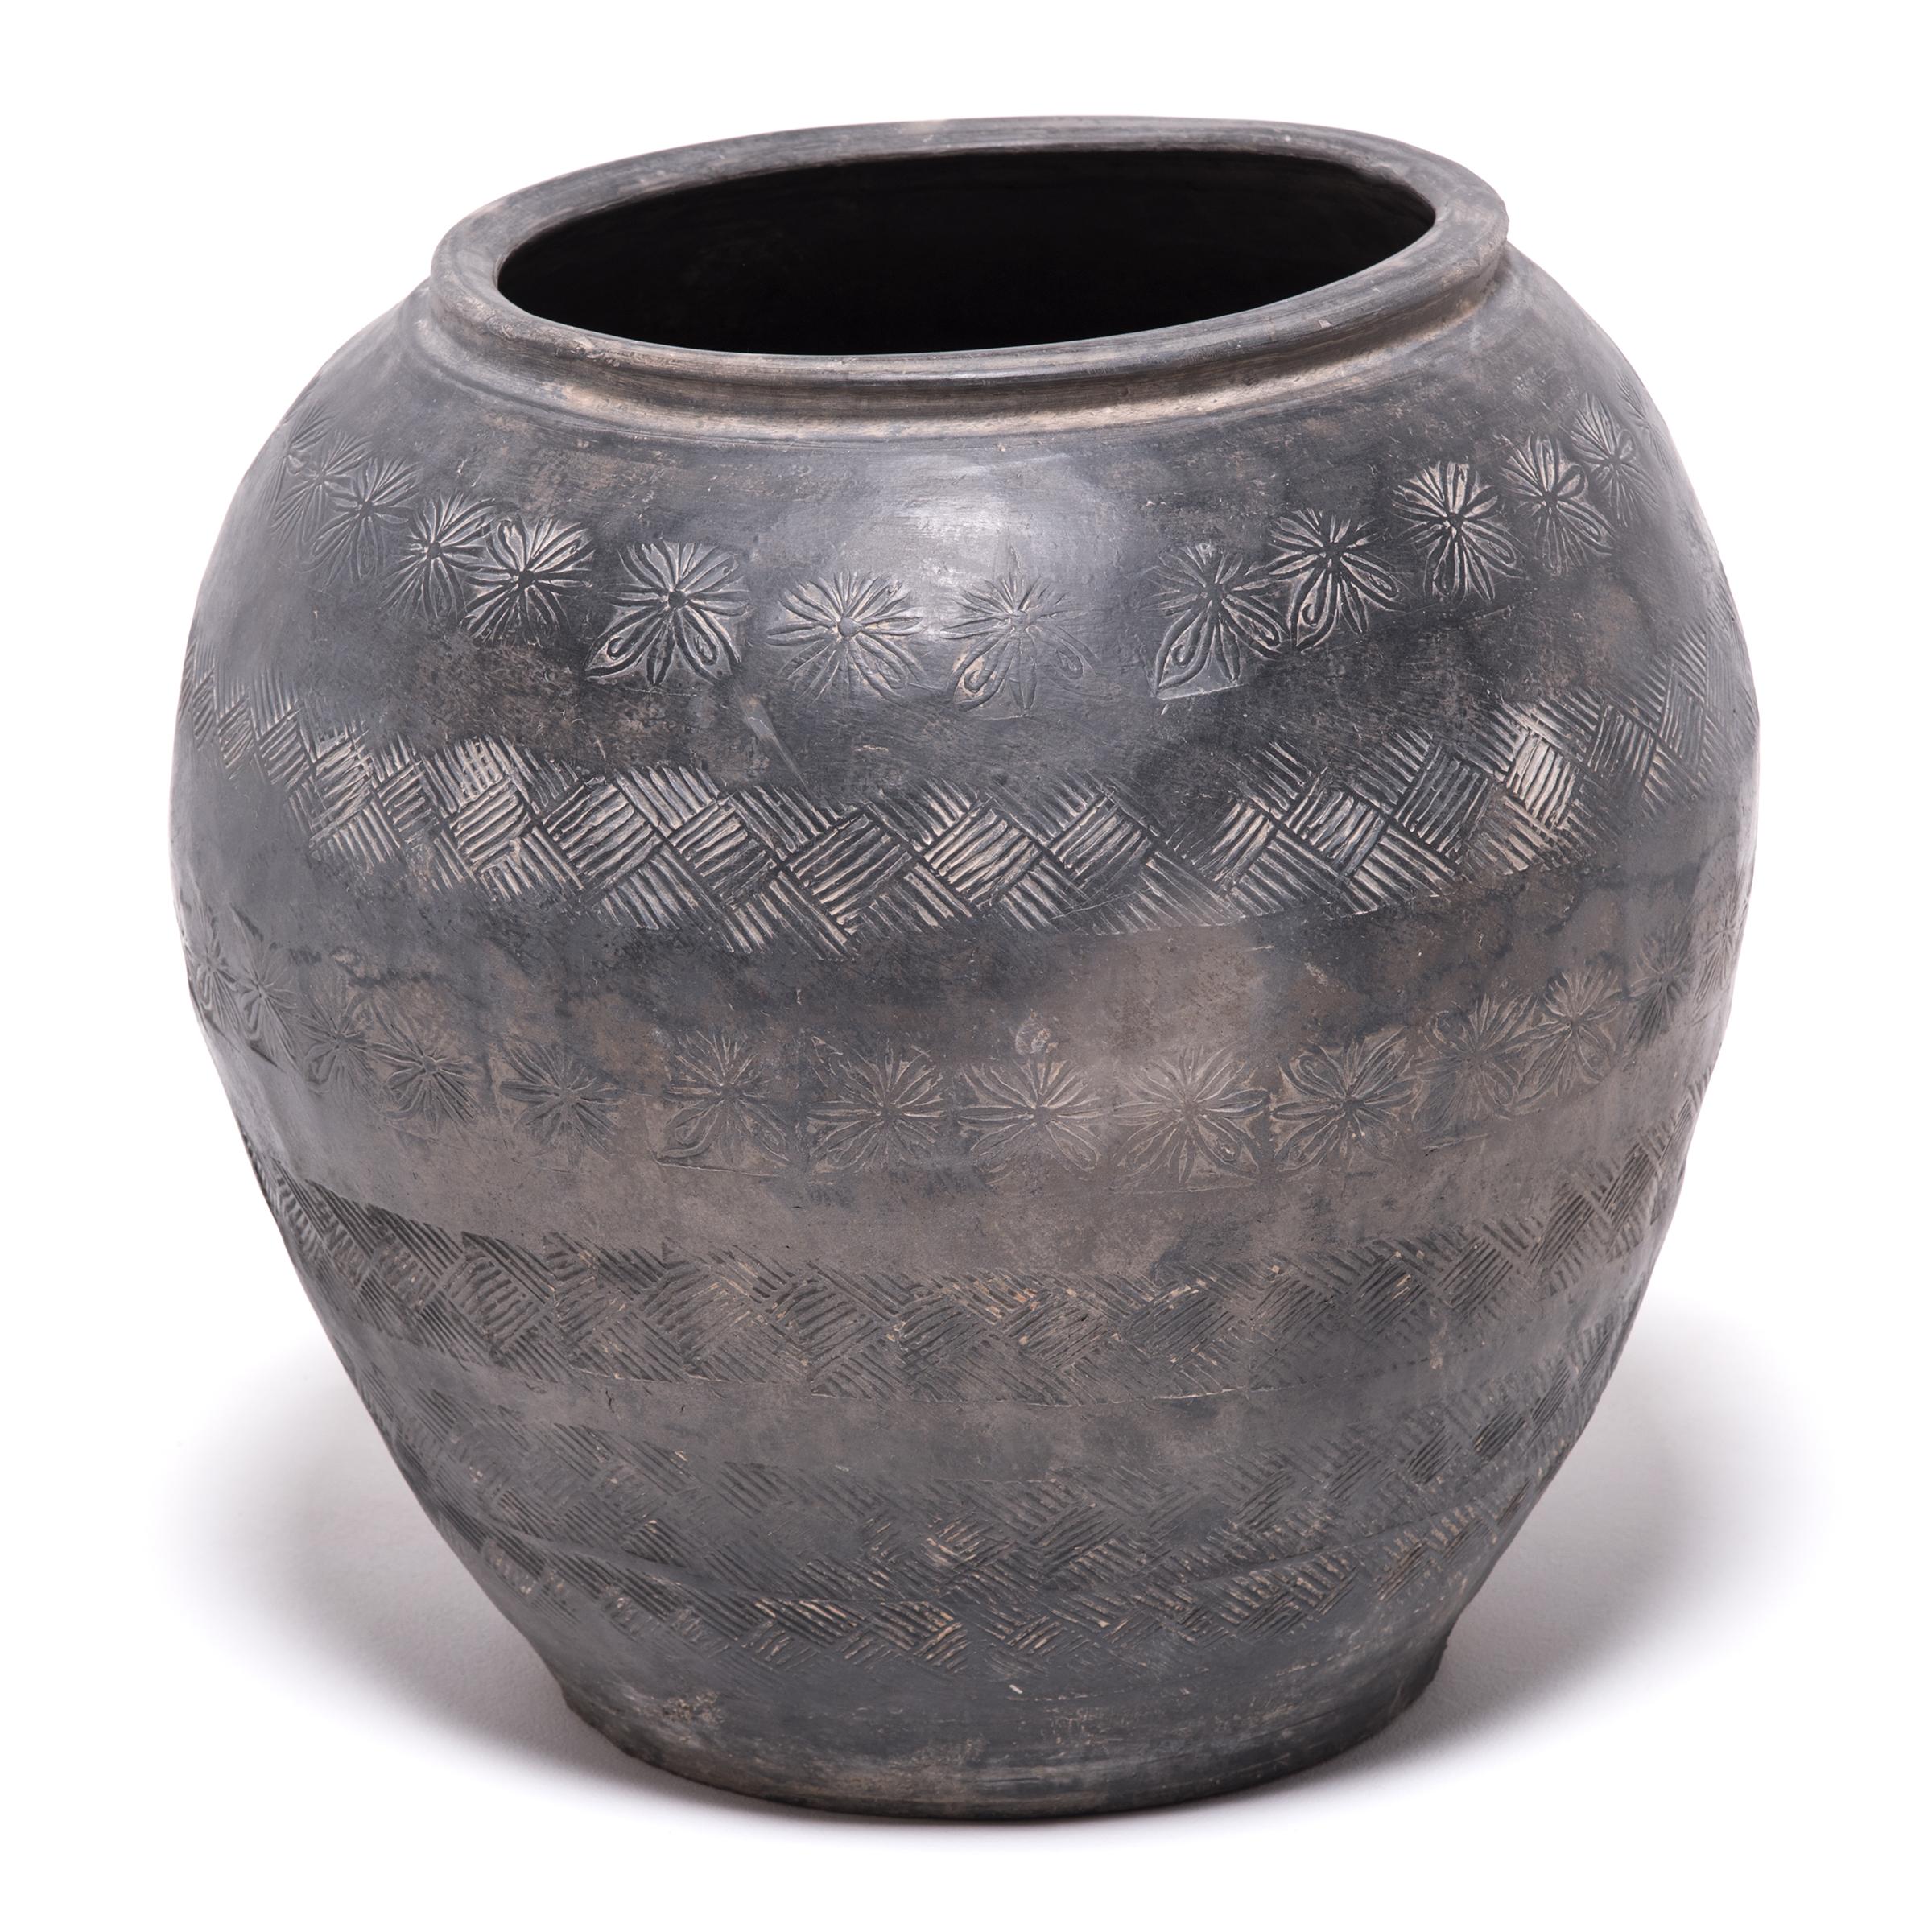 Rustic Chinese Unglazed Stamped Clay Jar